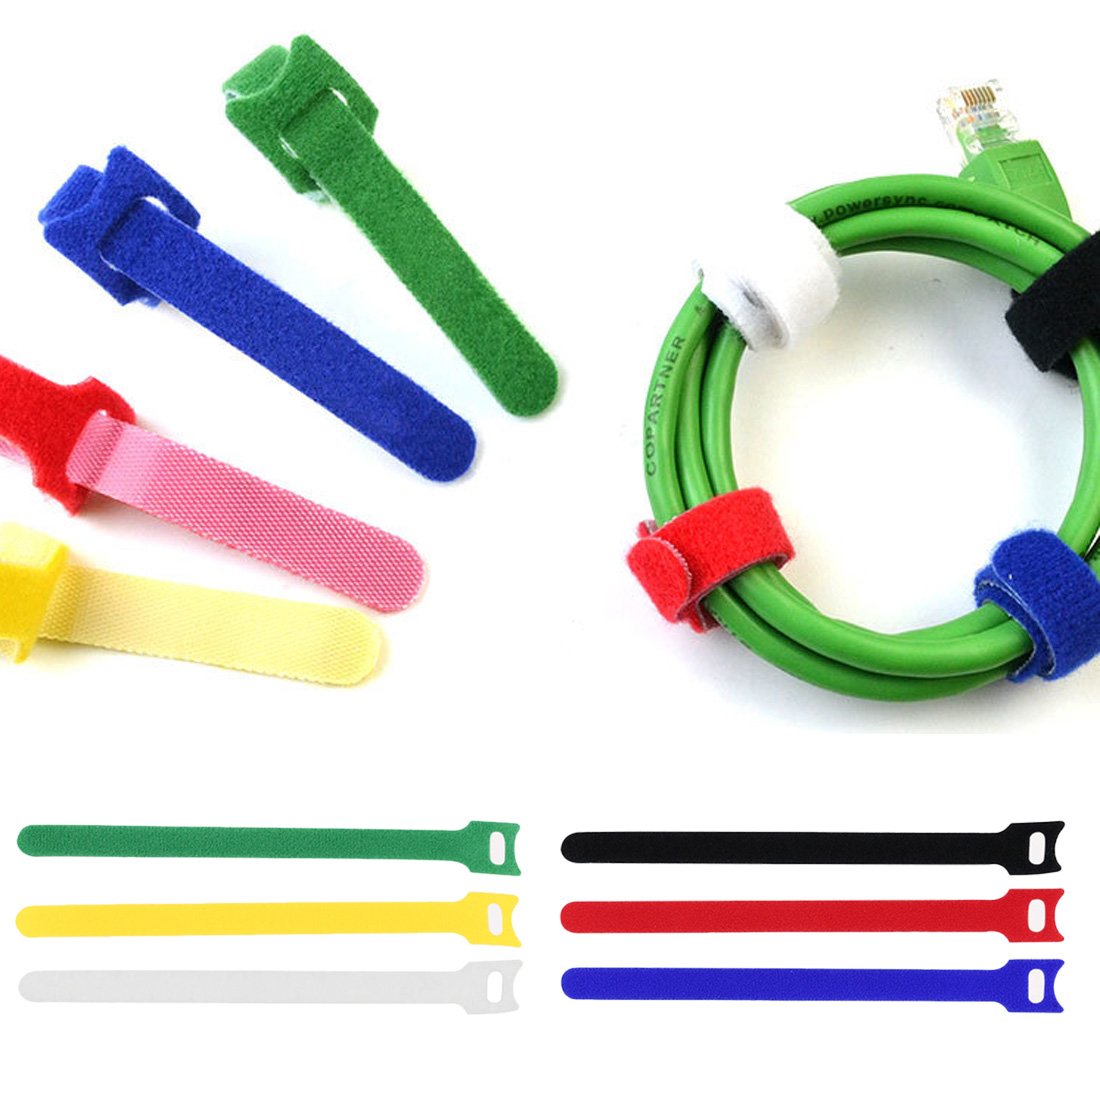 10Pcs Magic Sticky Self Adhesive Hooks Loops Tape Nylon Sticky Cable Ties Wire Strap Cord Wrap Fastening Organizer Management